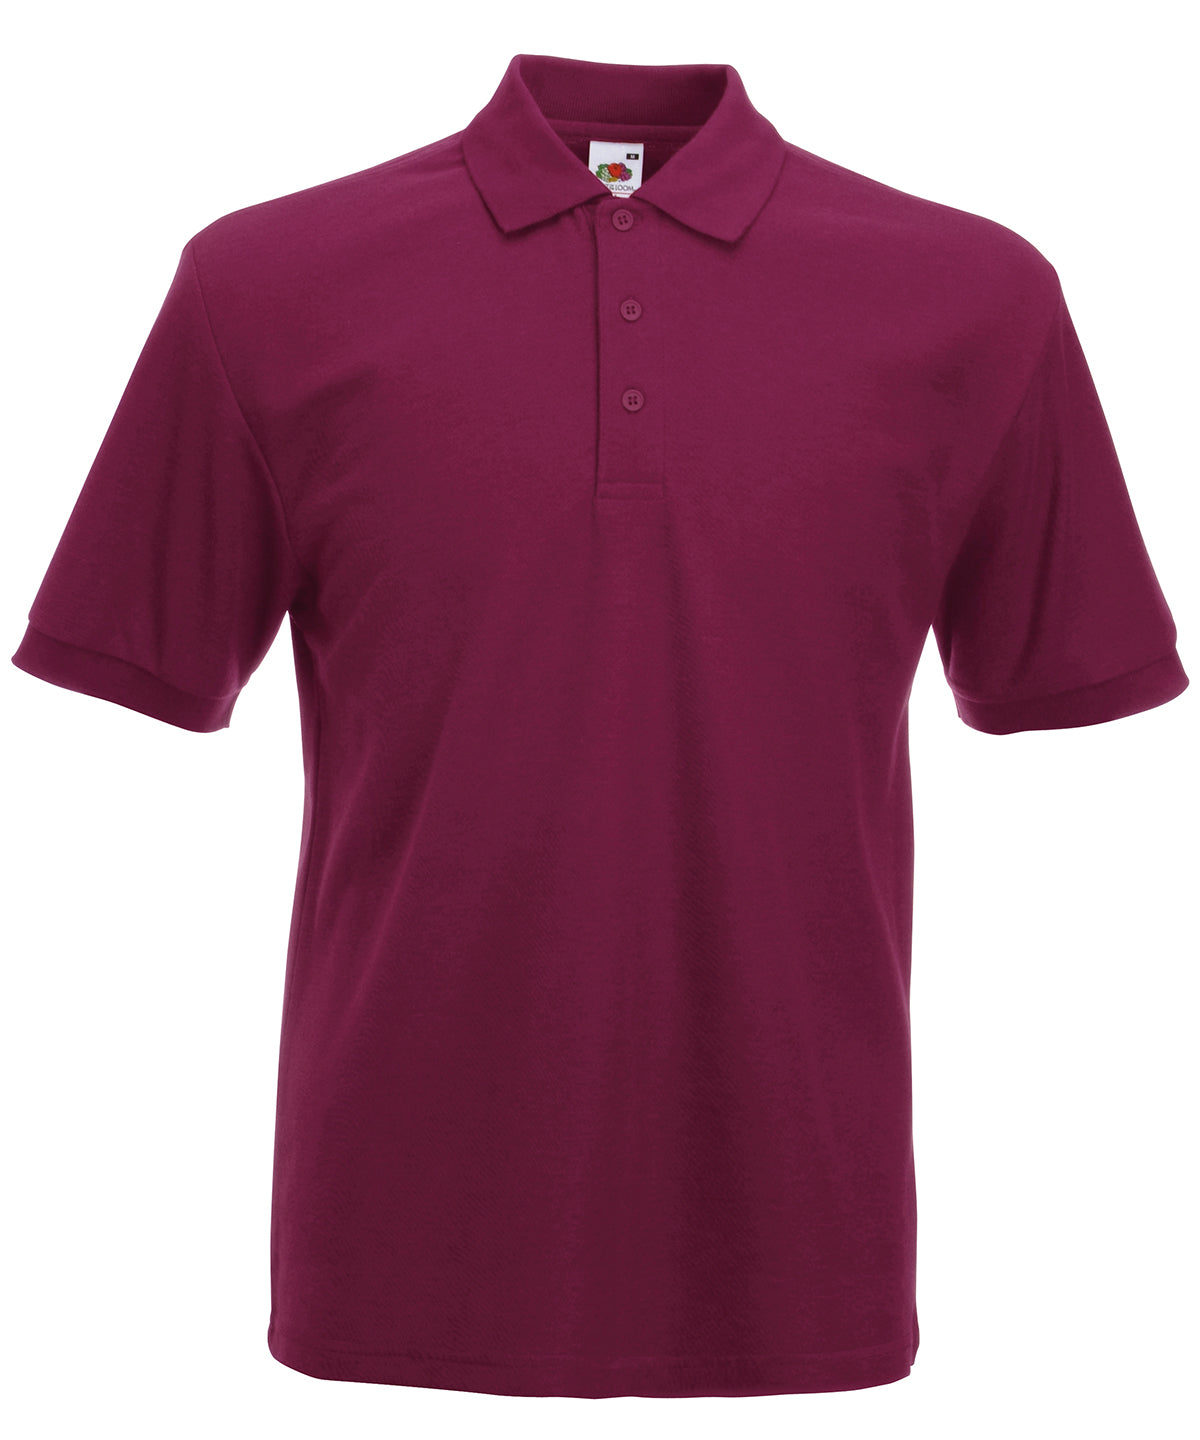 Personalised Polo Shirts - Black Fruit of the Loom Heavyweight 65/35 polo